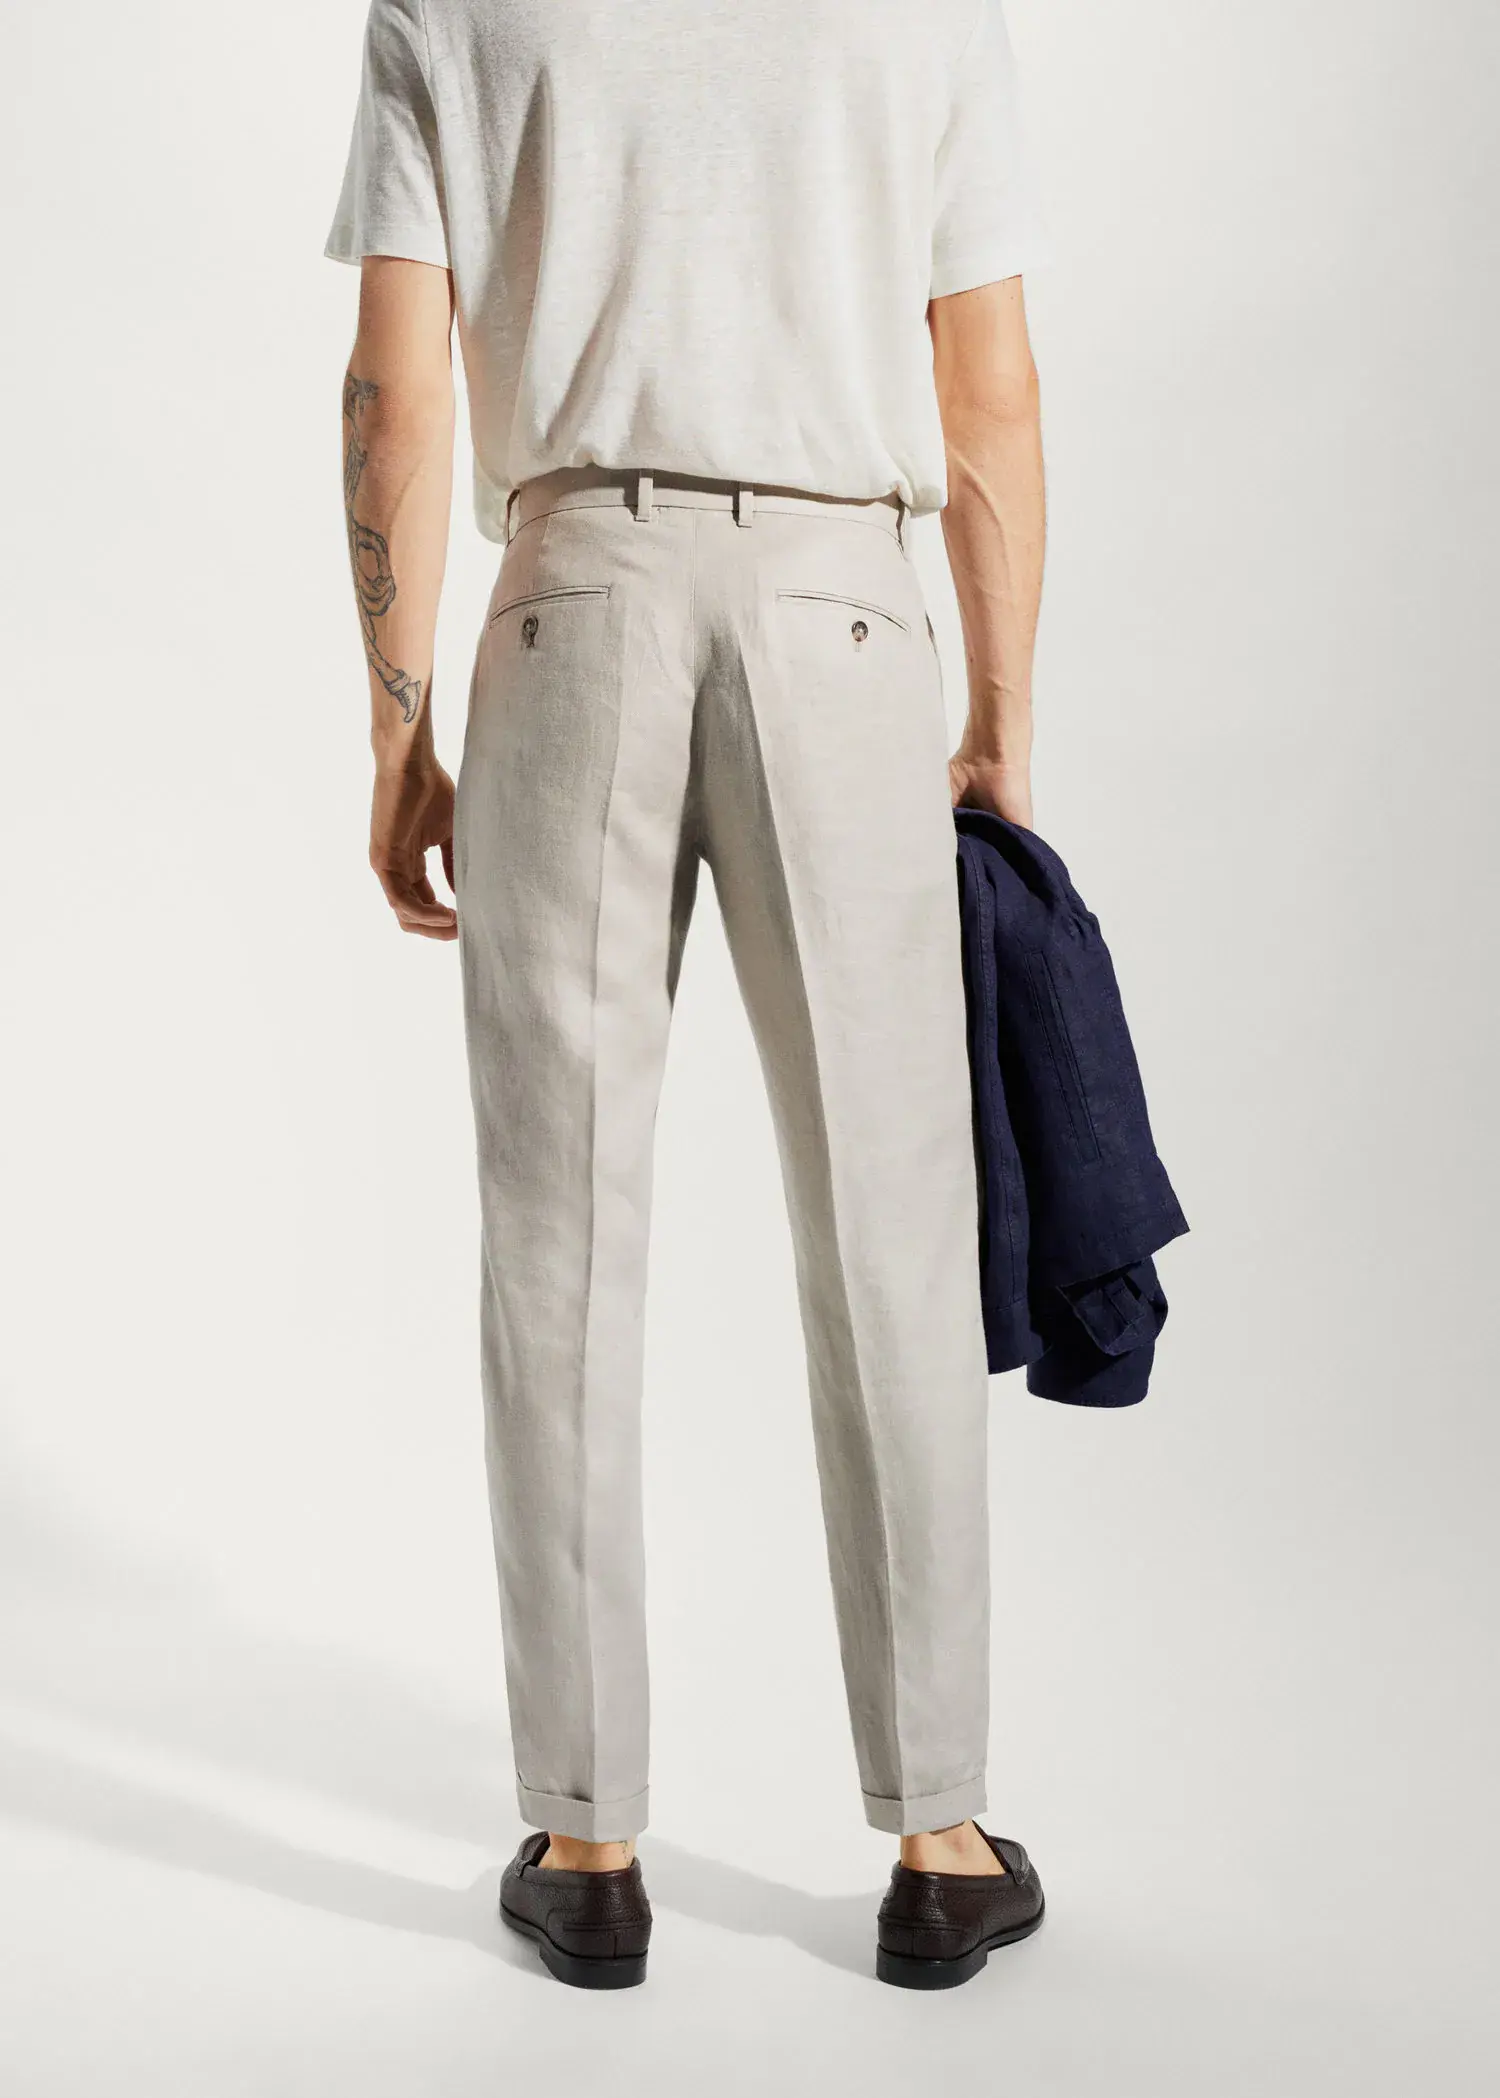 Mango 100% linen regular-fit trousers. a man in a white suit is holding a jacket. 